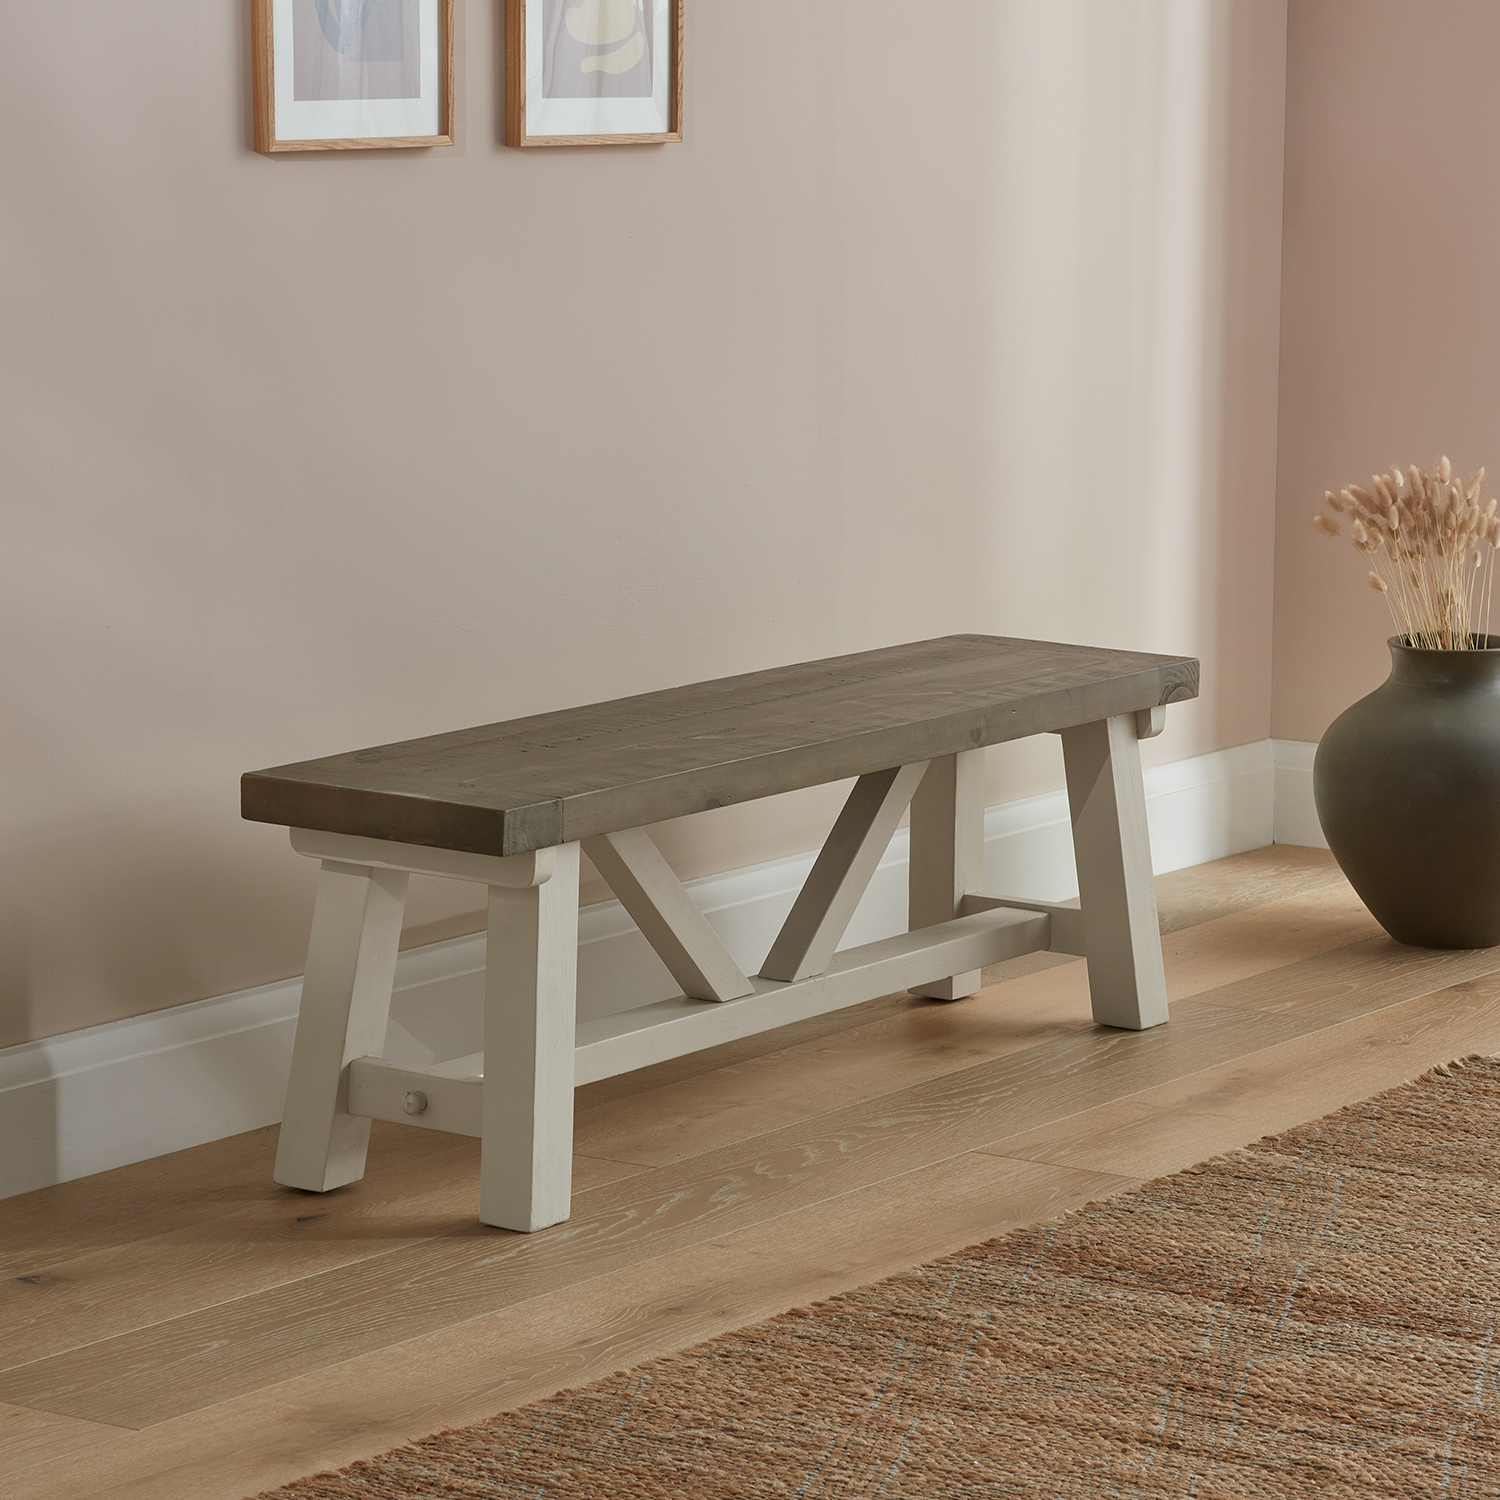 Modern Farmhouse bench placed in a wooden hallway next to an ornamental vase